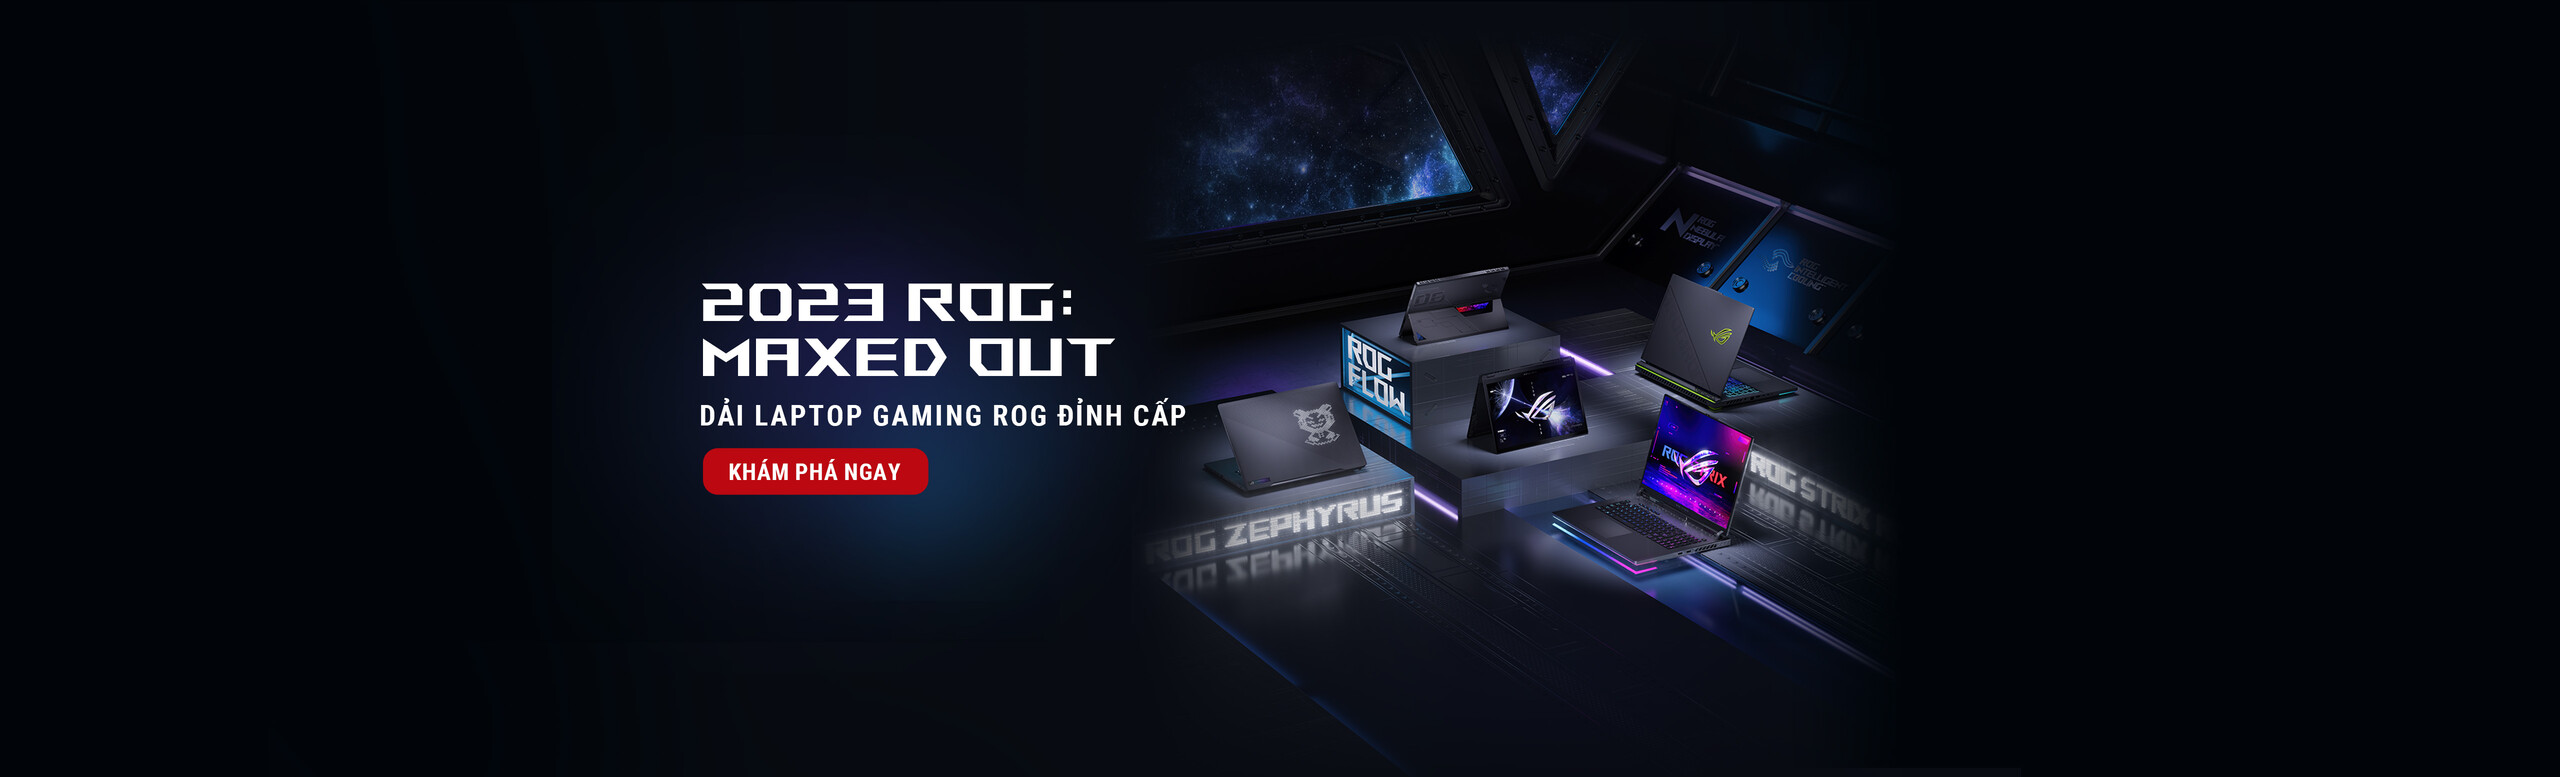 ROG Republic of Gamers/ The Rise of Gamers.